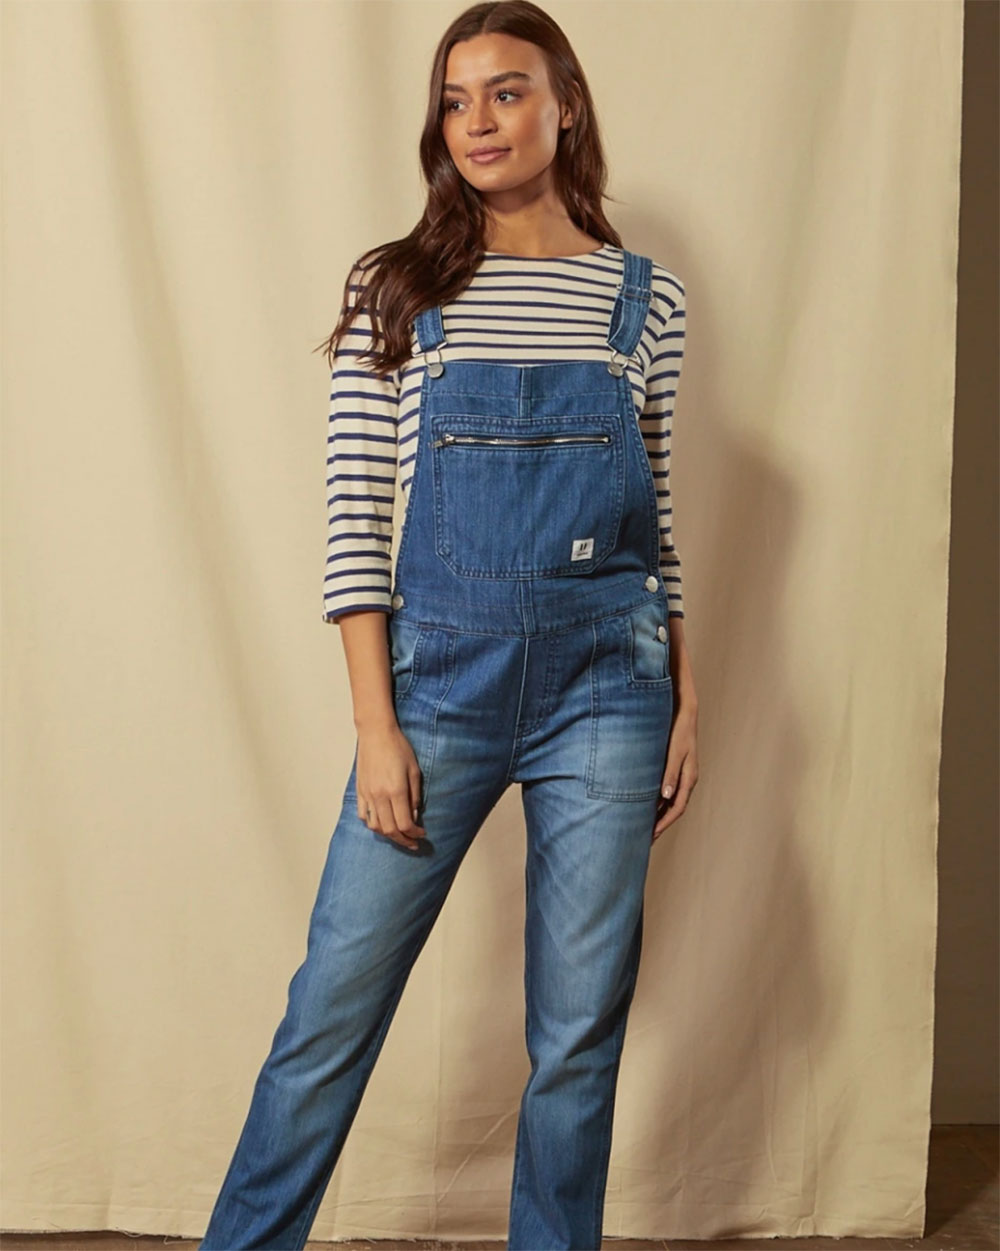 Dungaree Dress Ethically Made Overall Dress, Overall Jumper